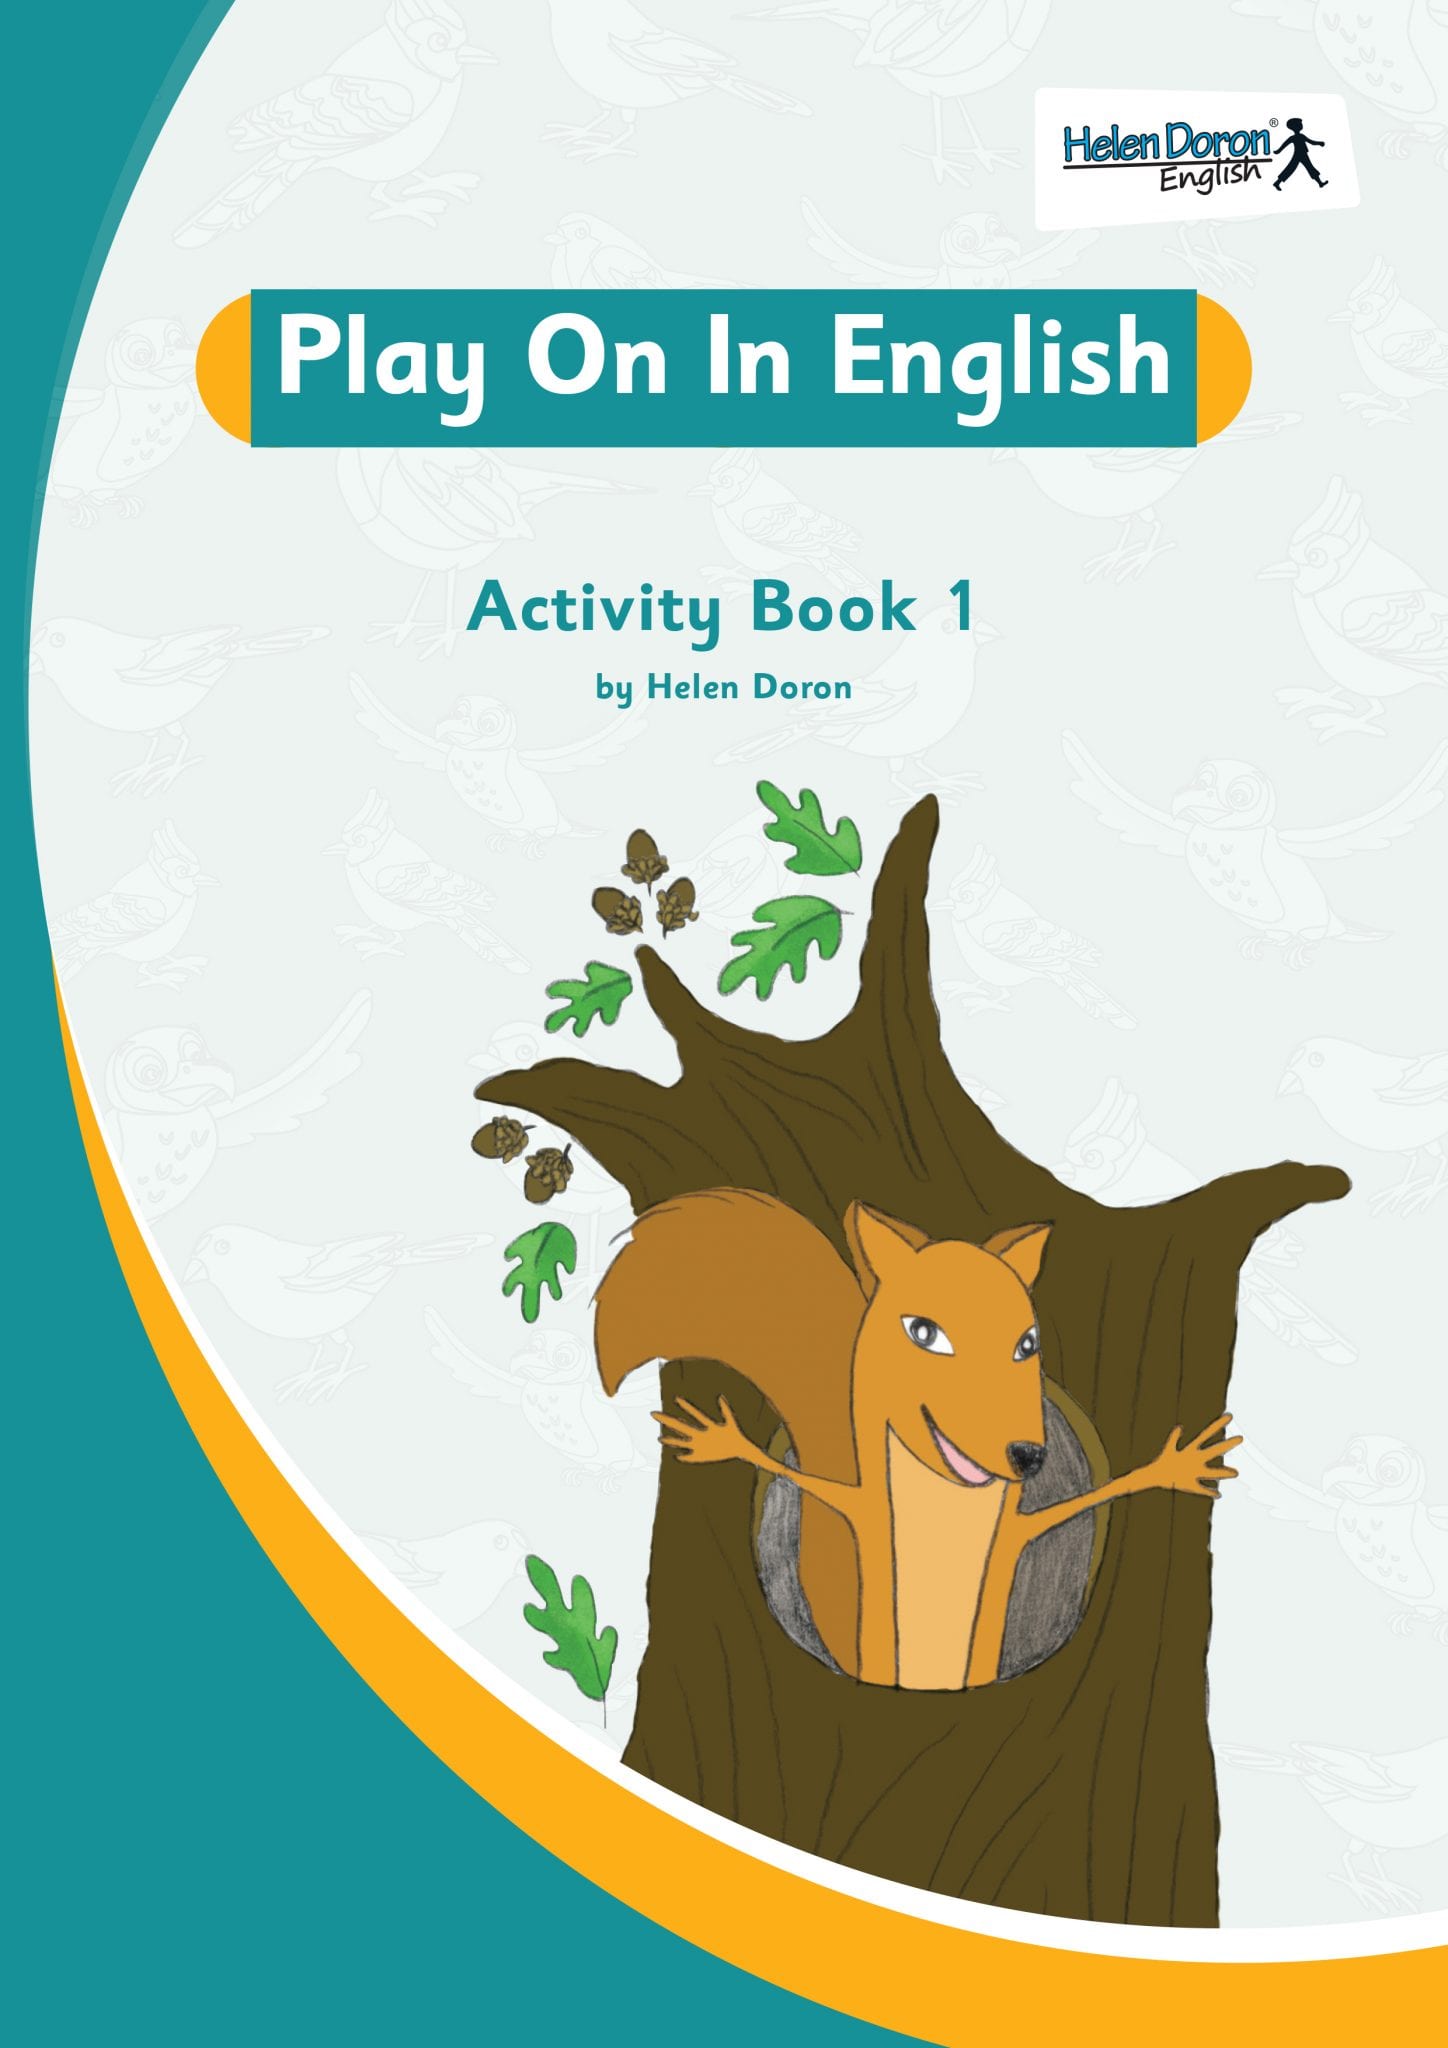 Play On in English Holiday Course